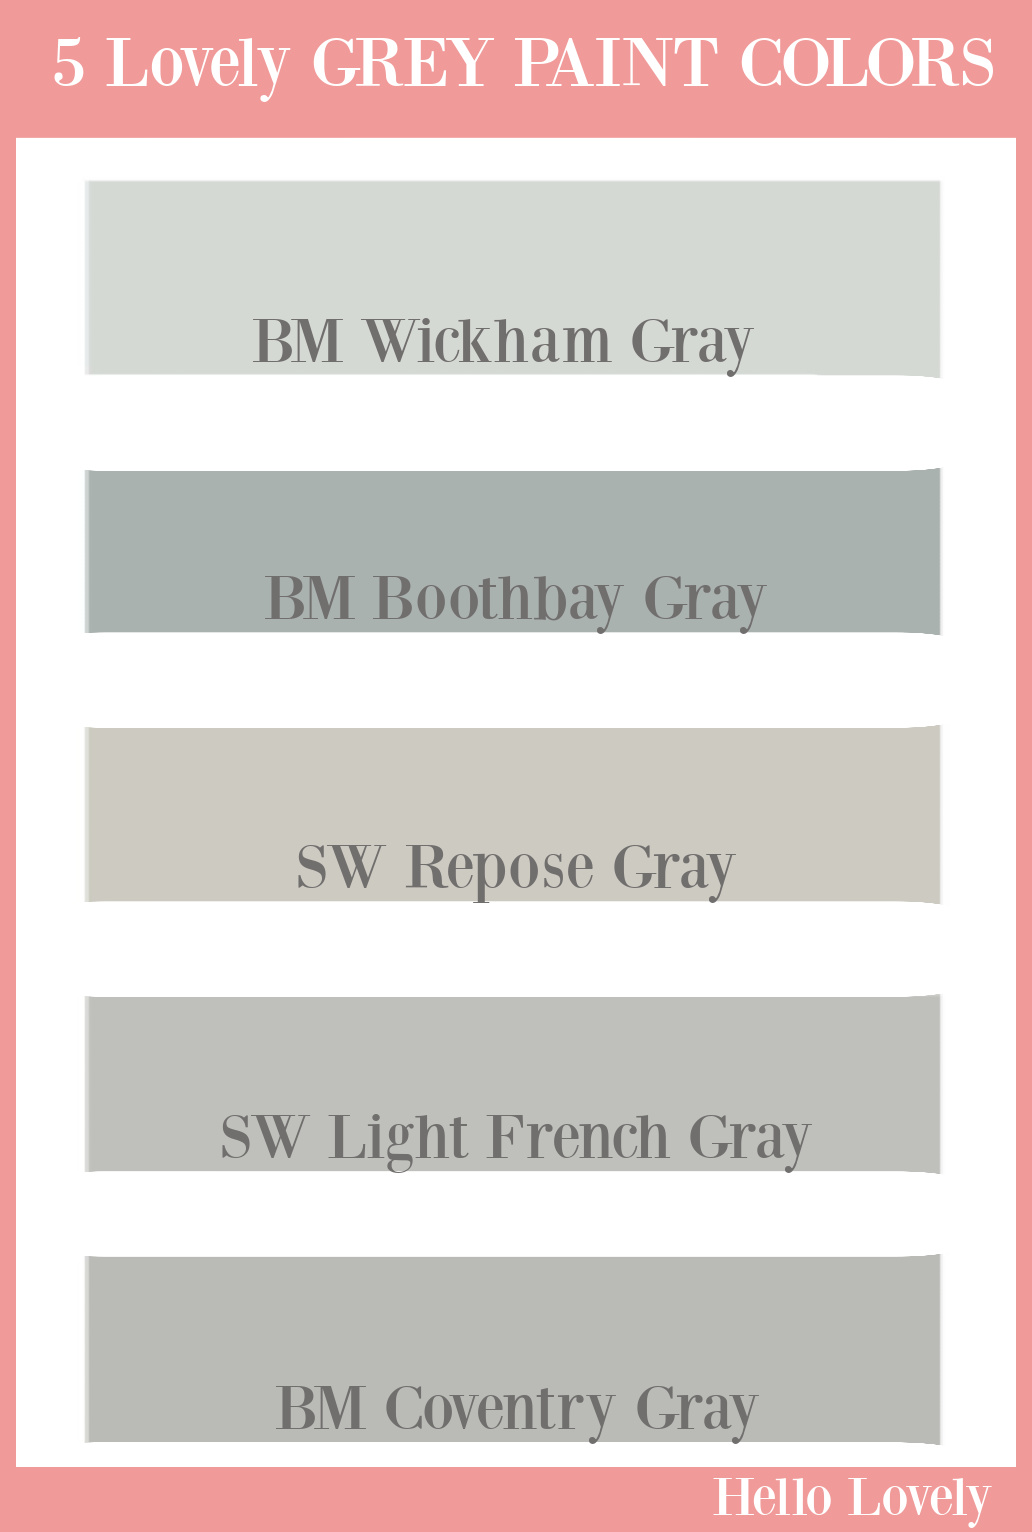 5 lovely grey paint colors - Hello Lovely Studio. #greypaintcolors #bestgraypaint